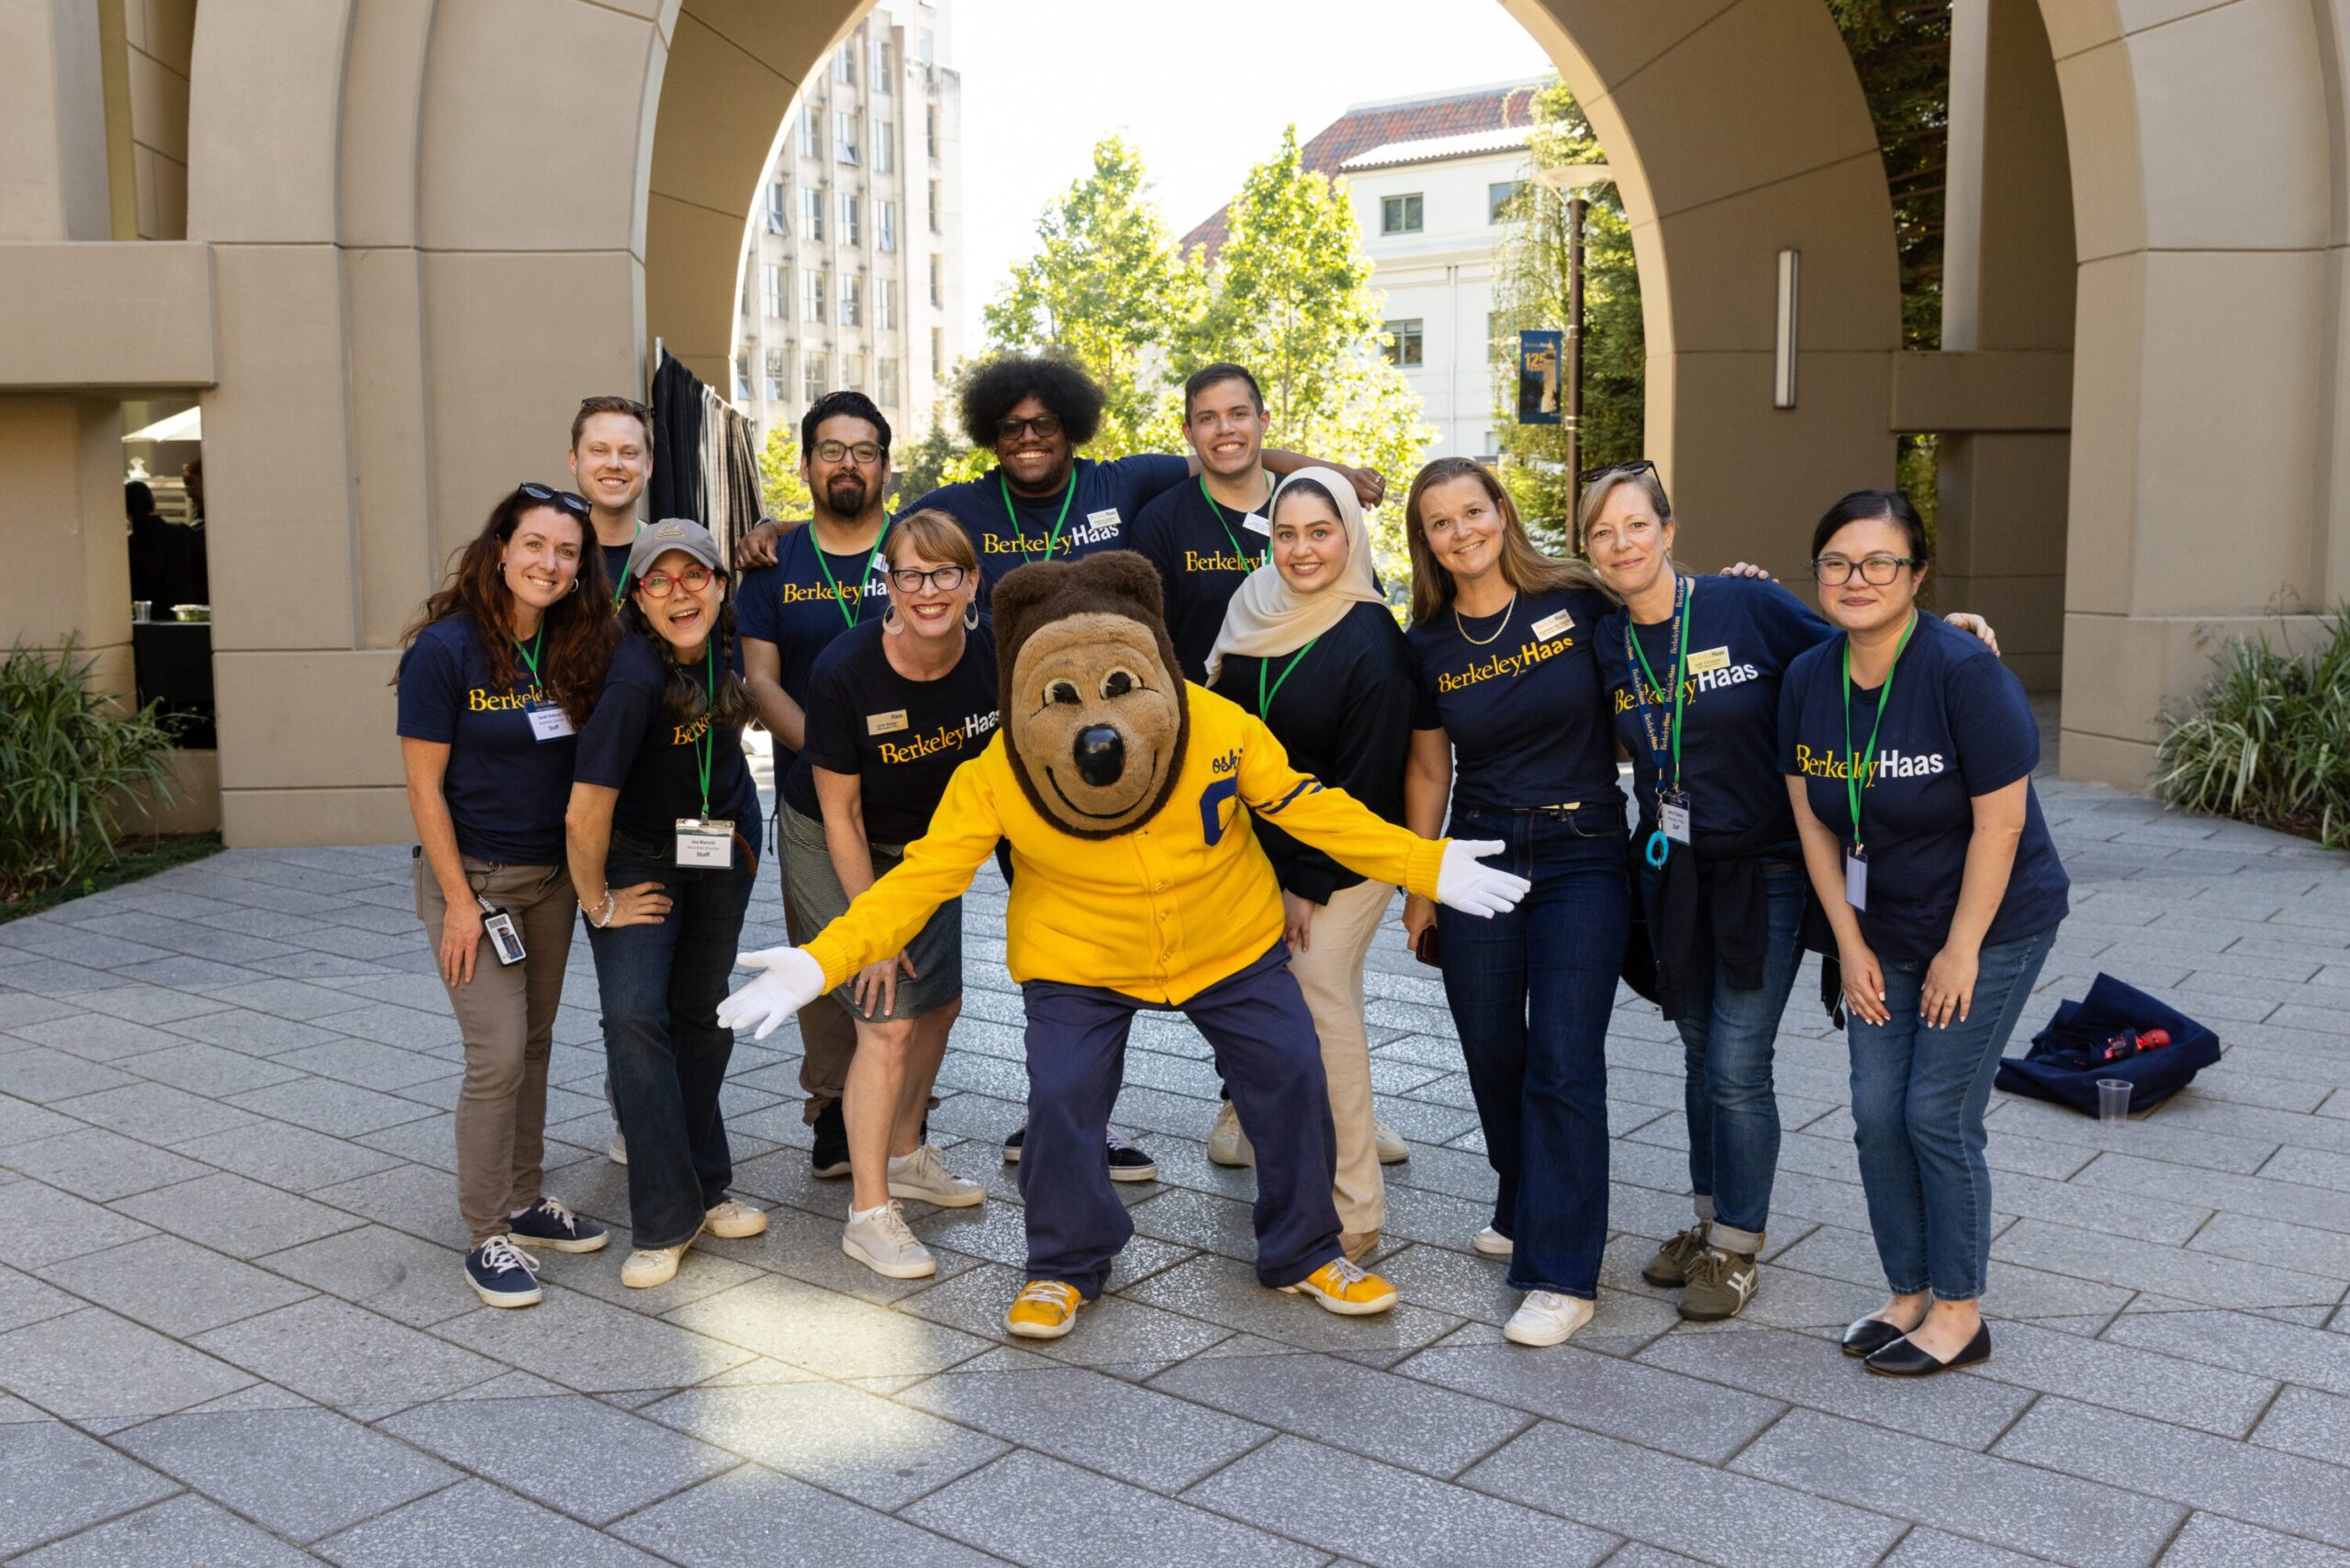 group of men and women stand in front of the arch at Haas Berkeley with shirts that read: Berkeley Haas. Oski the bear stands in front with arms open